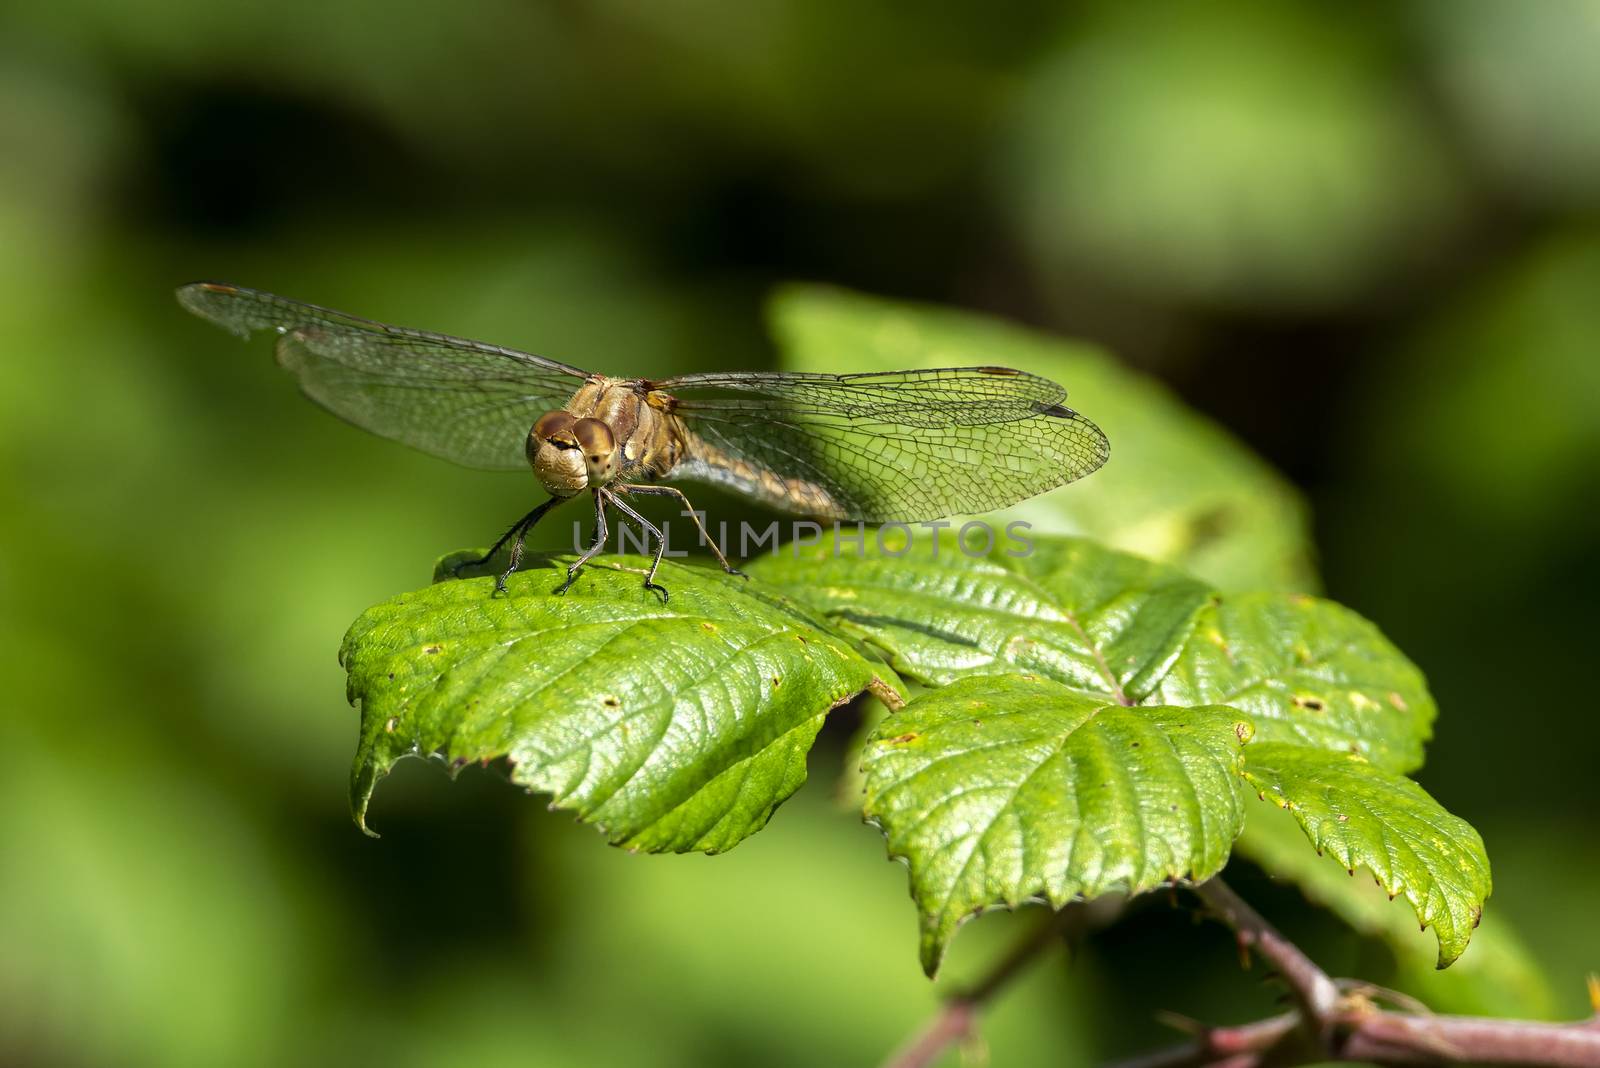 Common Darter dragonfly is one of the most abundant species in the UK and Europe